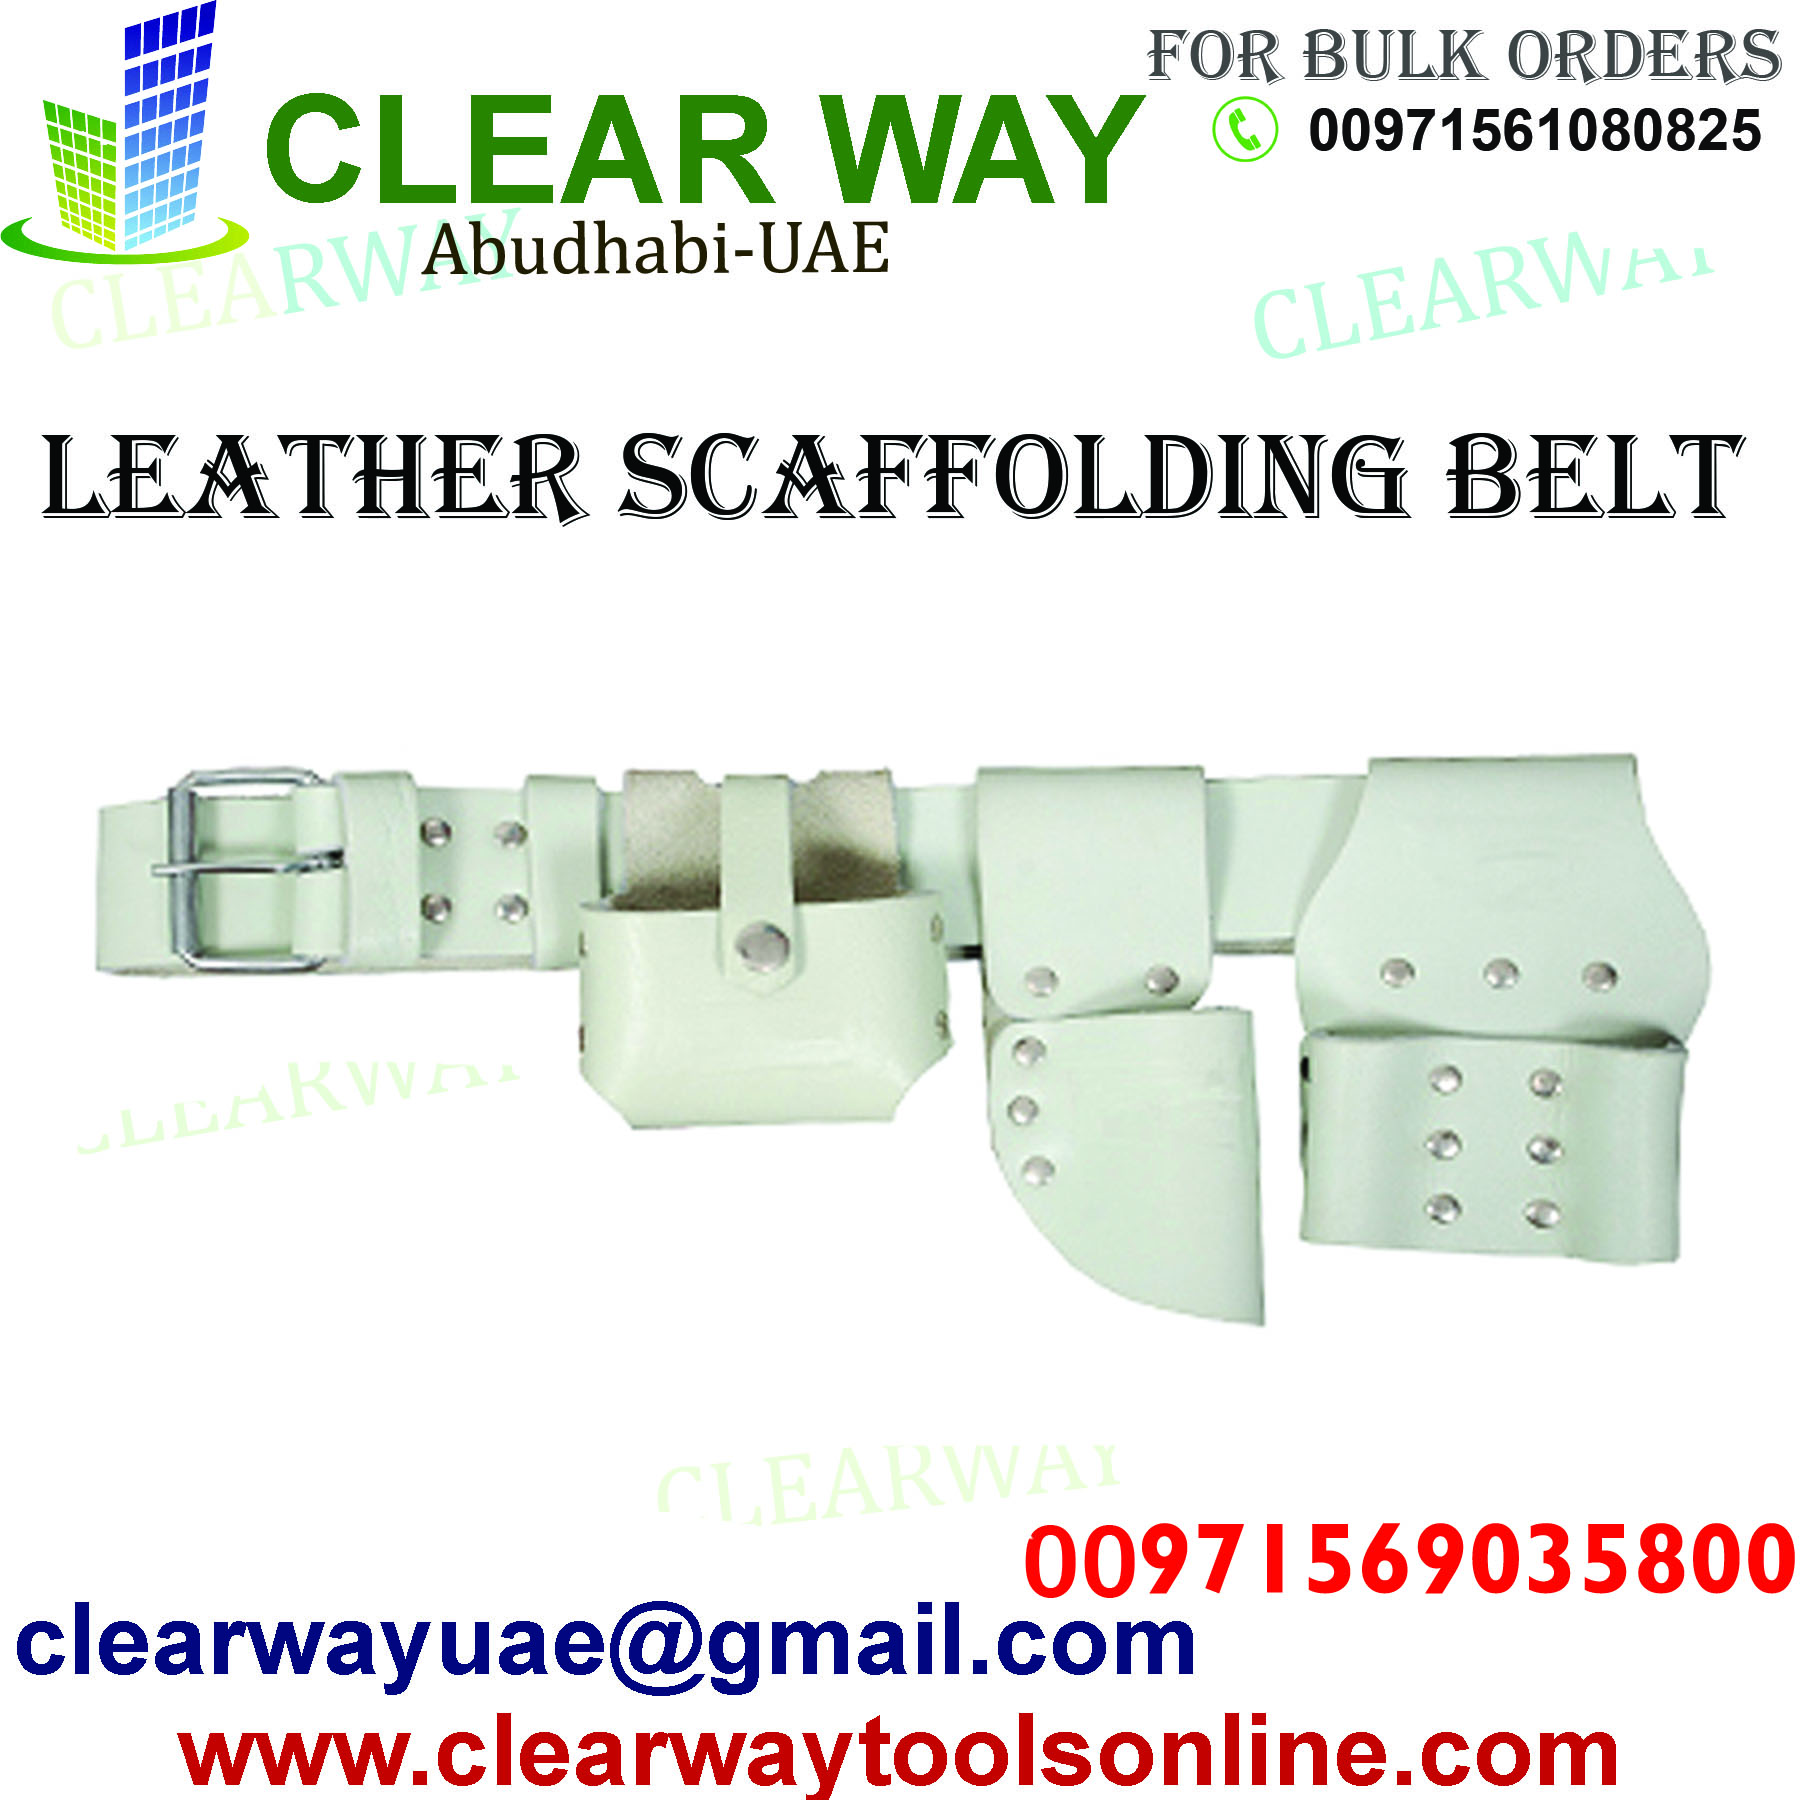 SCAFFOLDING BELT LEATHER WHITE DEALER IN MUSSAFAH ABUDHABI UAE CLEARWAY